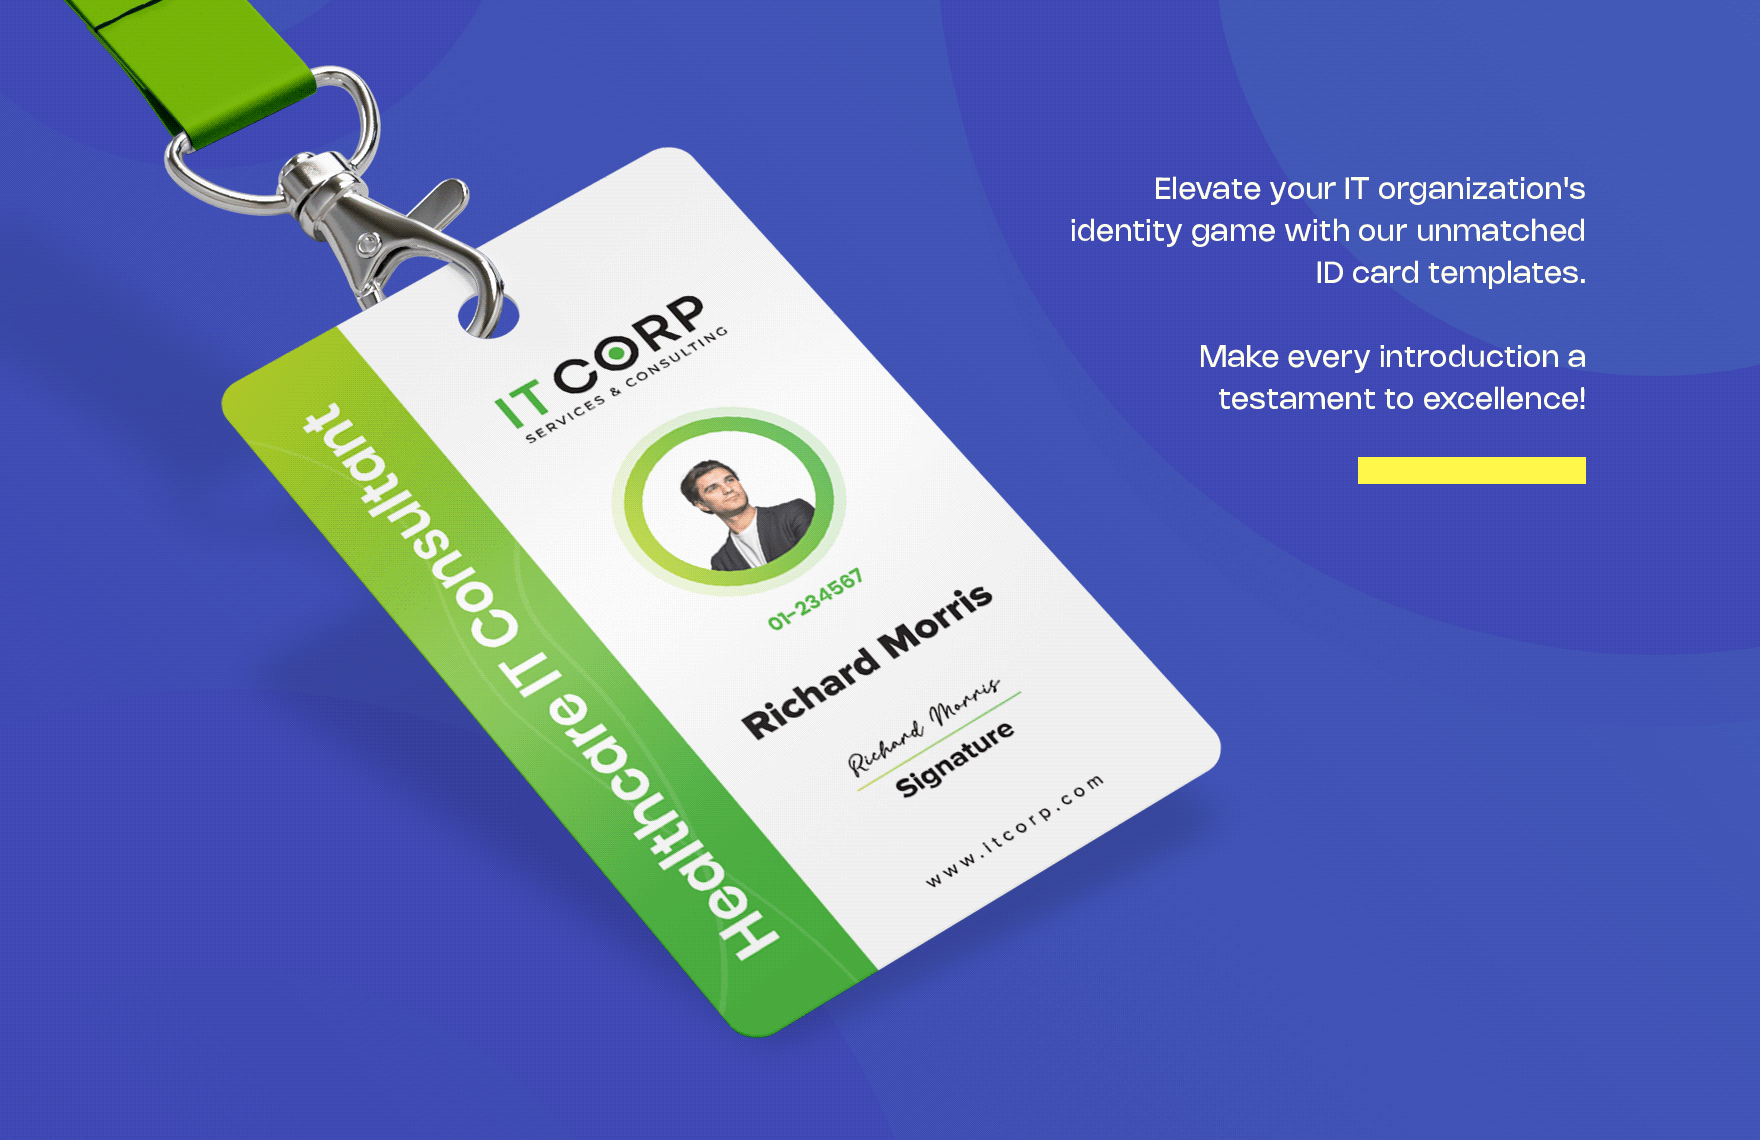 Healthcare IT Consulting ID Card Template